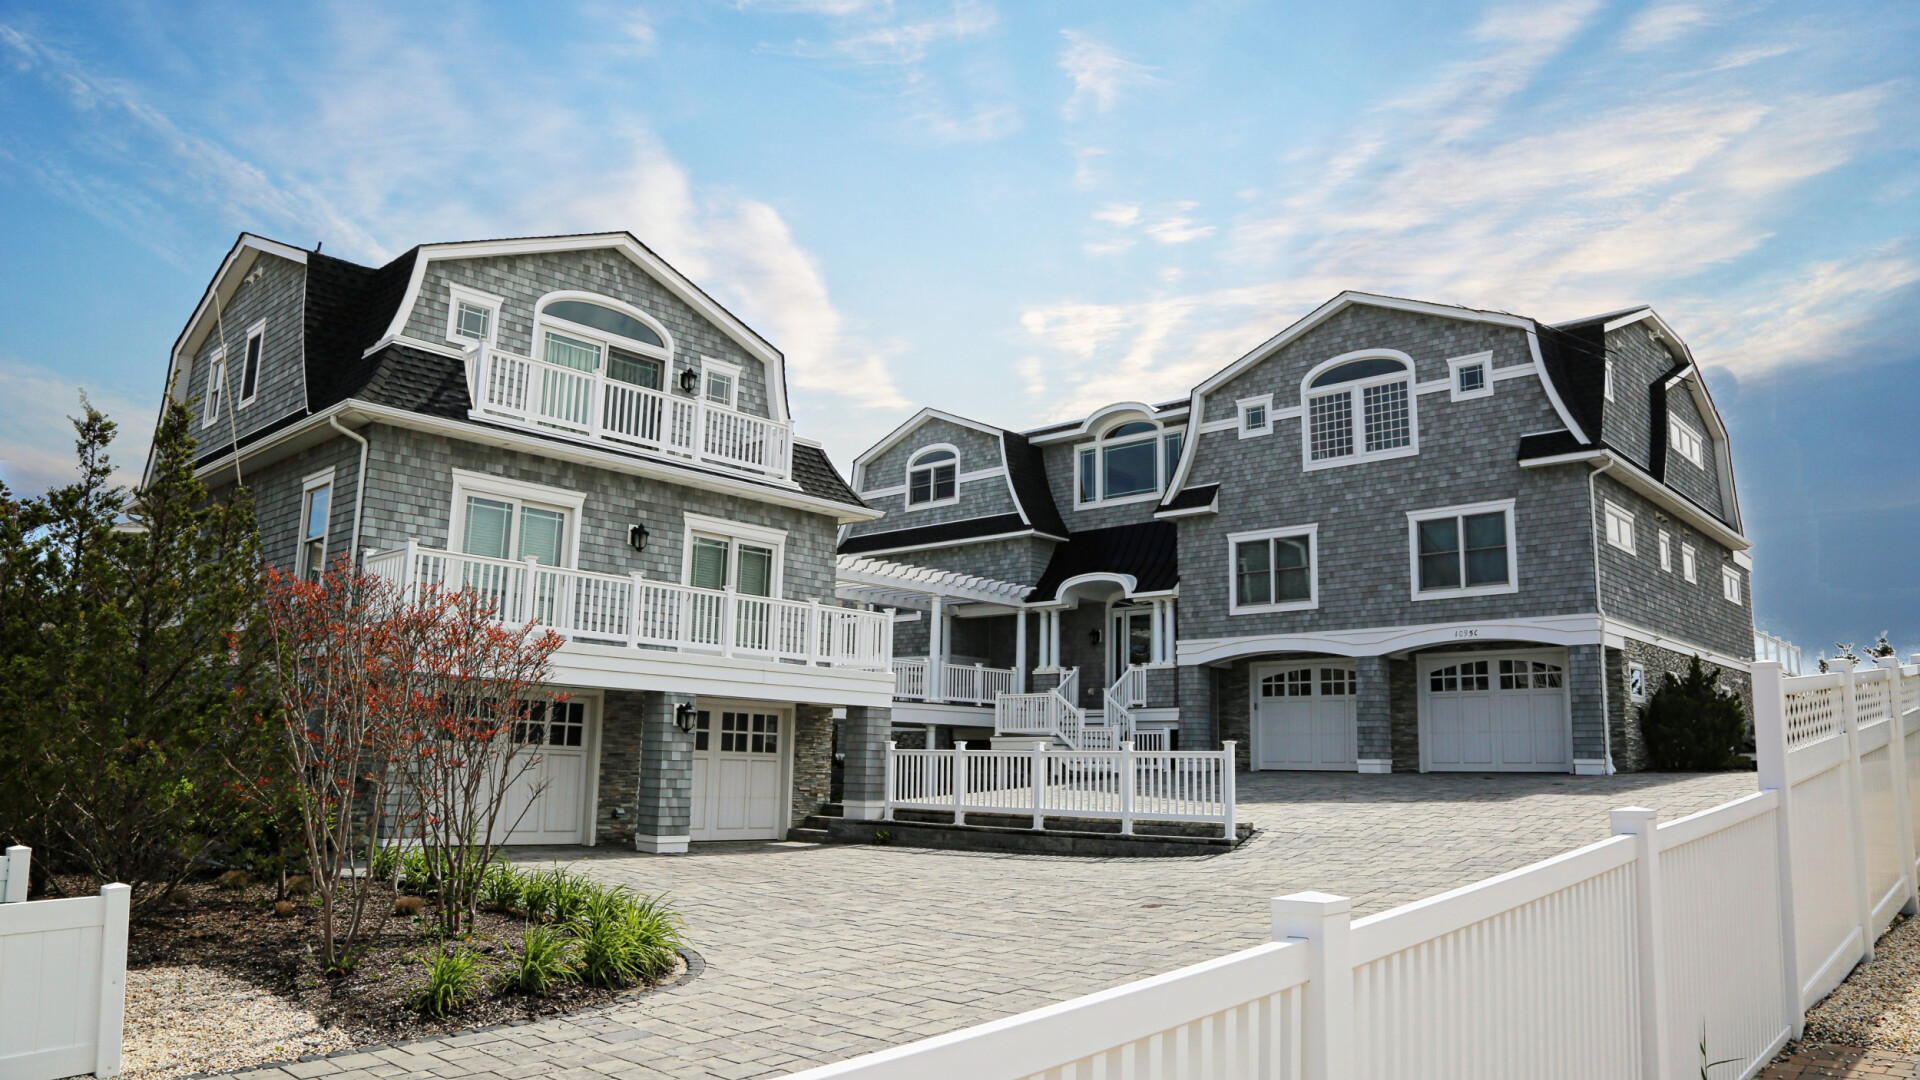 Exterior of luxury beach home boasting multiple balconies and an outdoor living space, Long Beach Island NJ